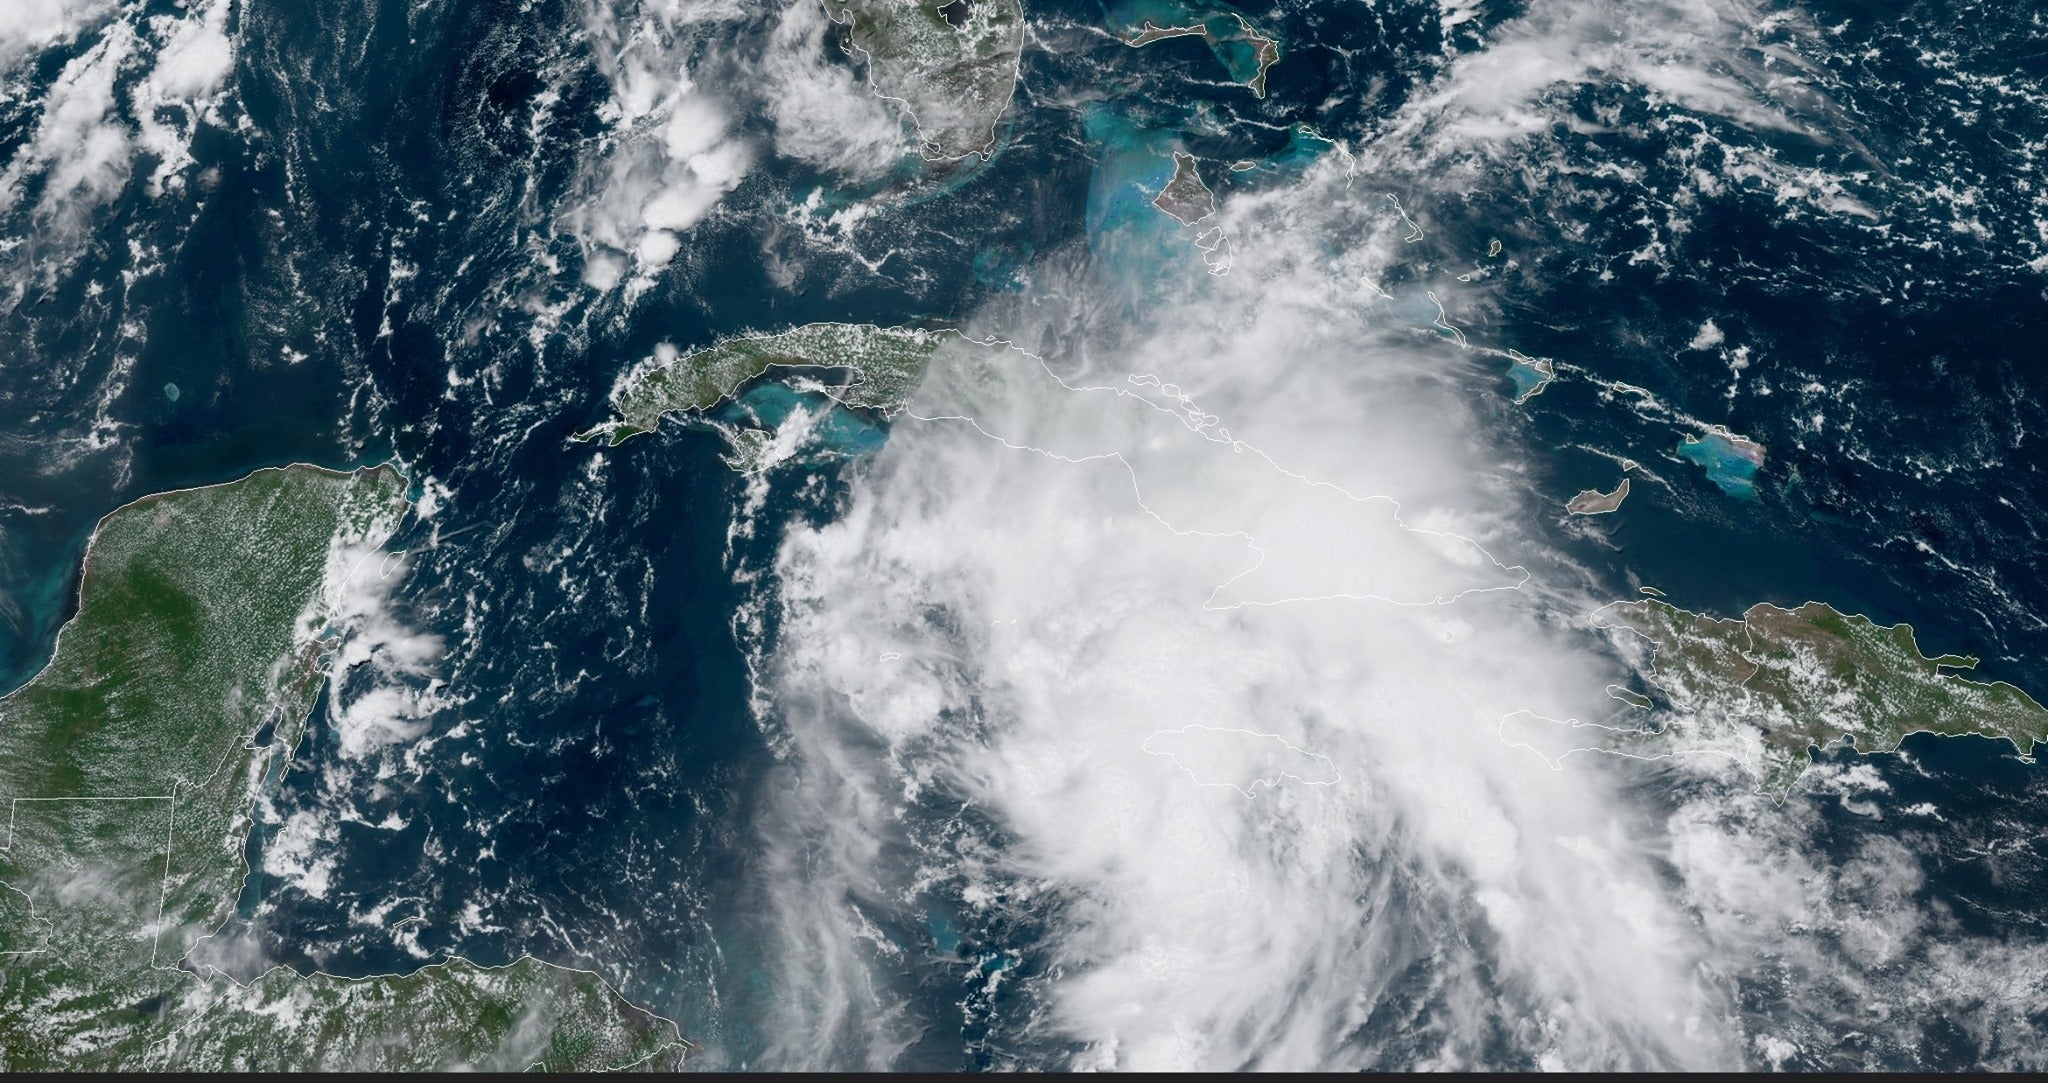 This tropical distrubance is expected to become a Hurricane Ida